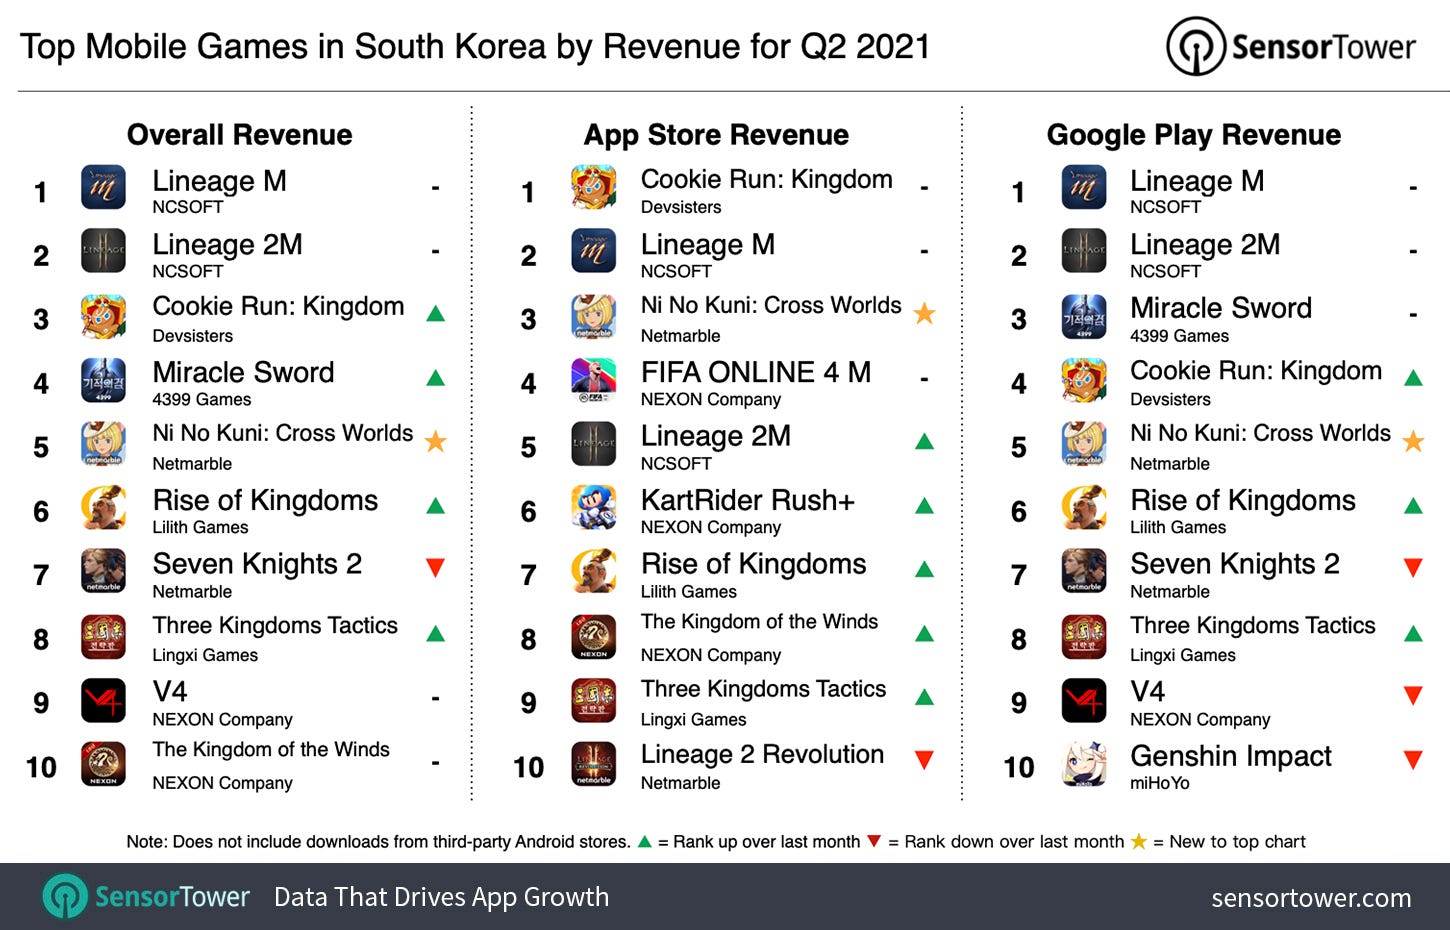 Top Mobile Games in South Korea for Q2 2021 by Revenue and Downloads